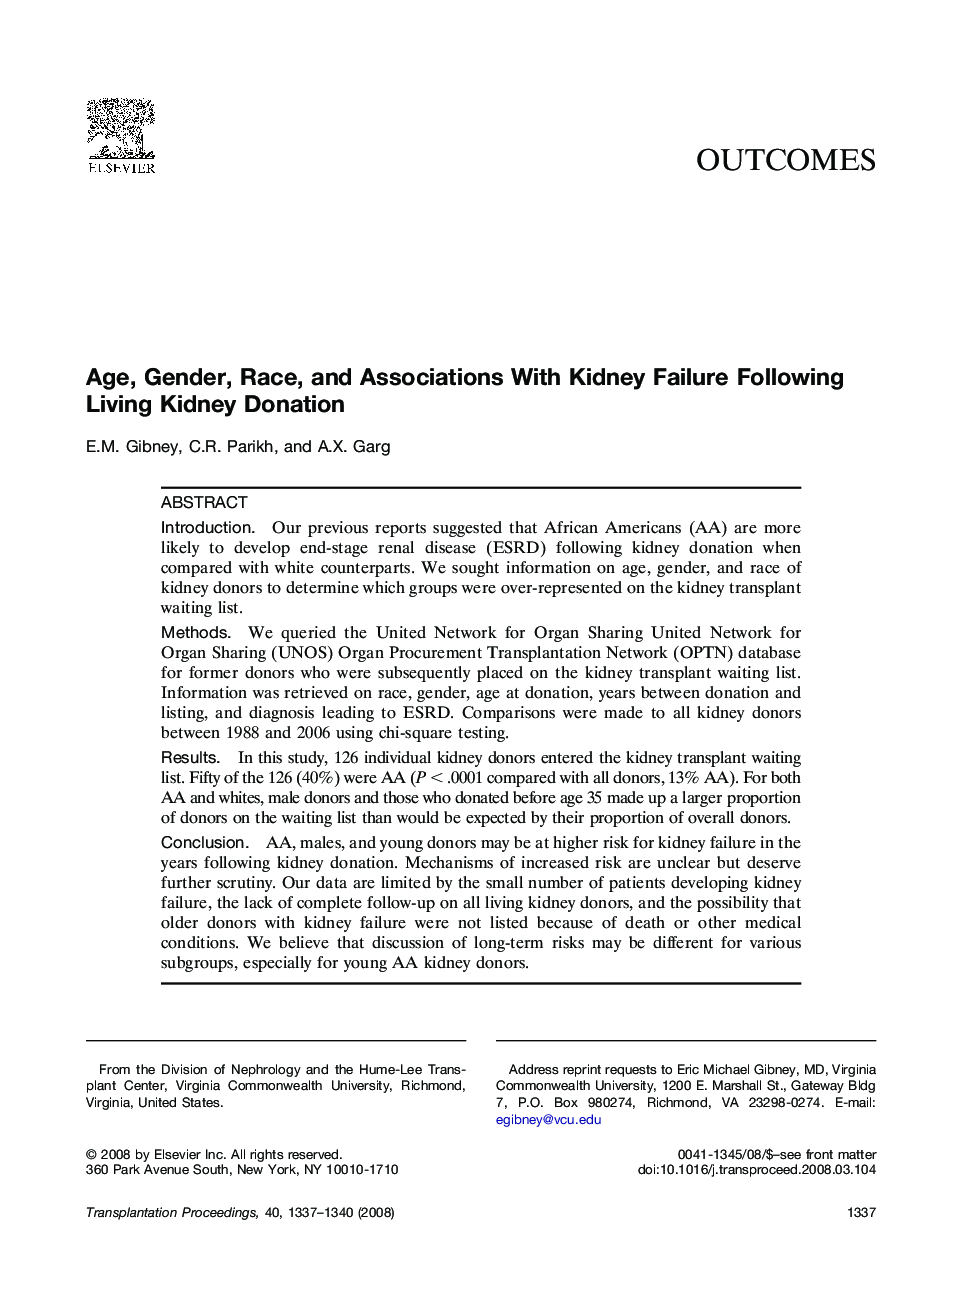 Age, Gender, Race, and Associations With Kidney Failure Following Living Kidney Donation